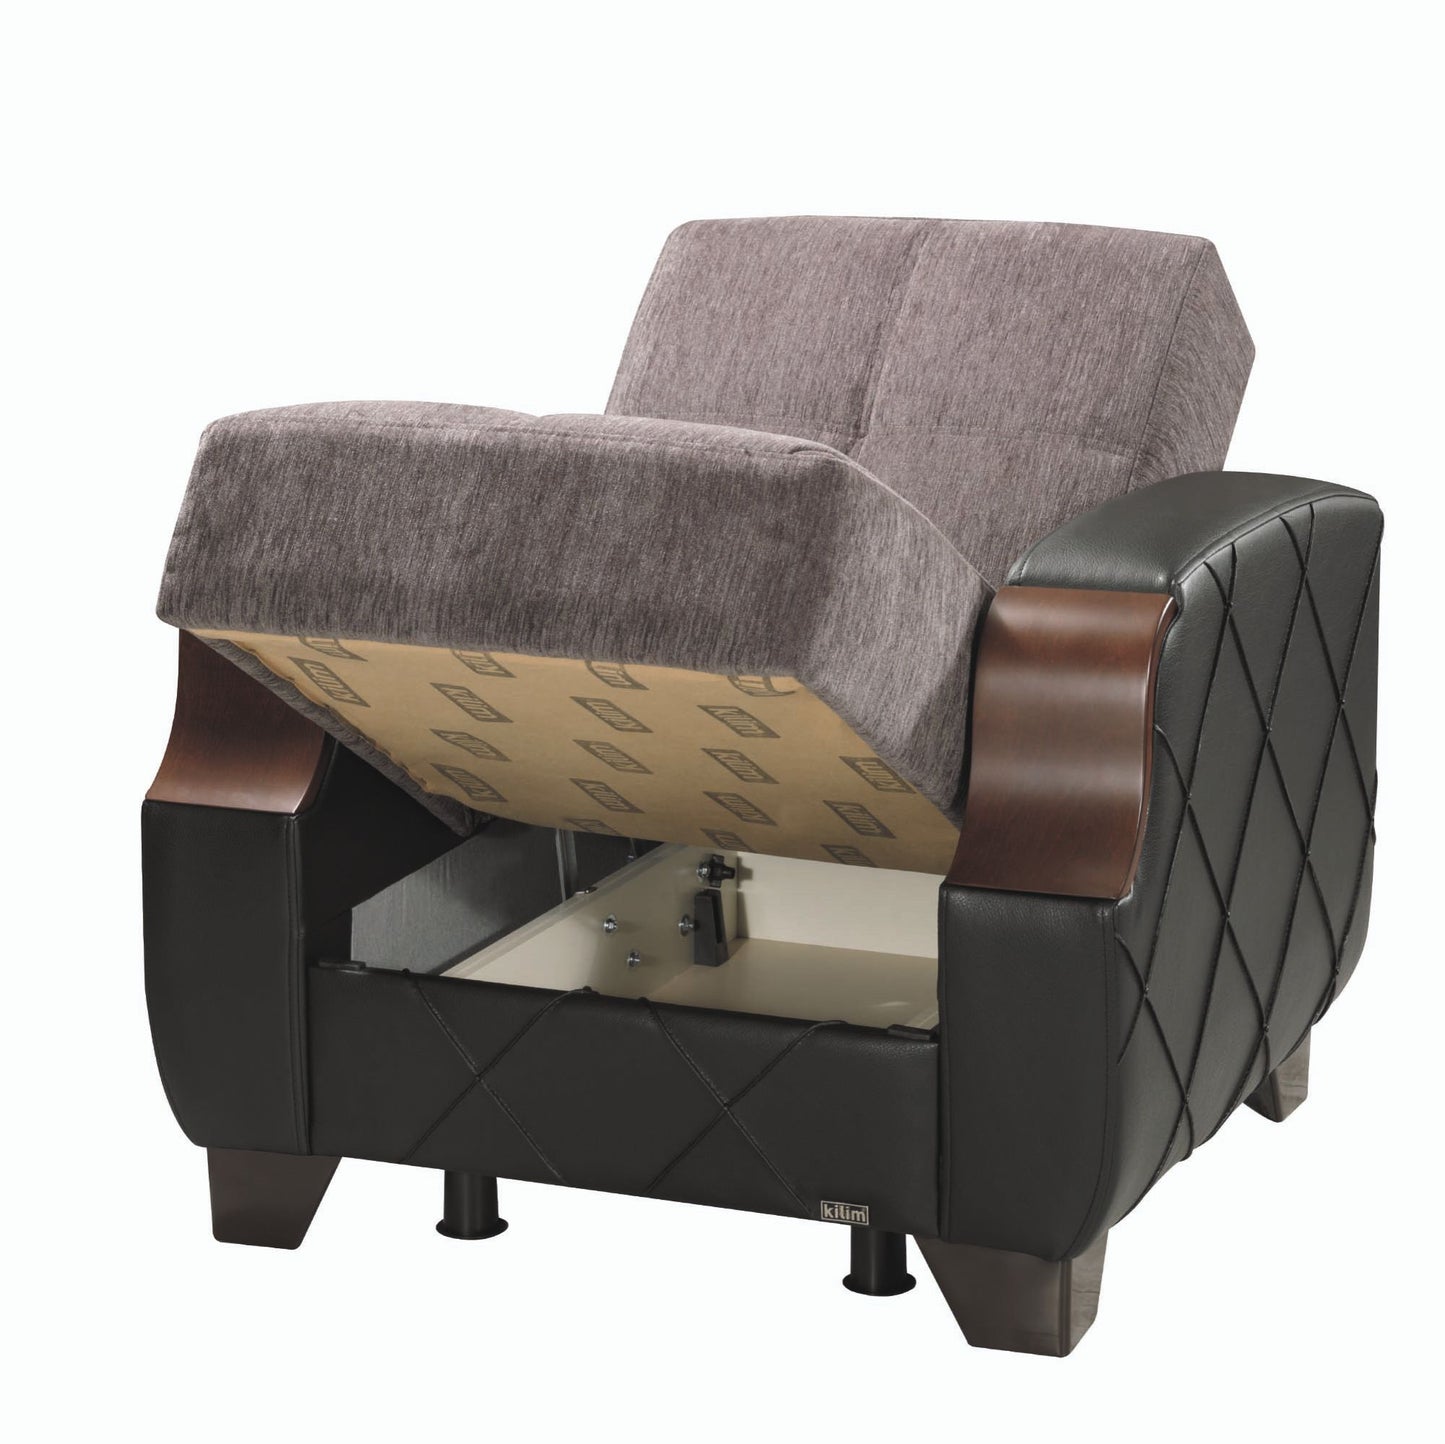 Ottomanson Molina - Convertible Armchair With Storage